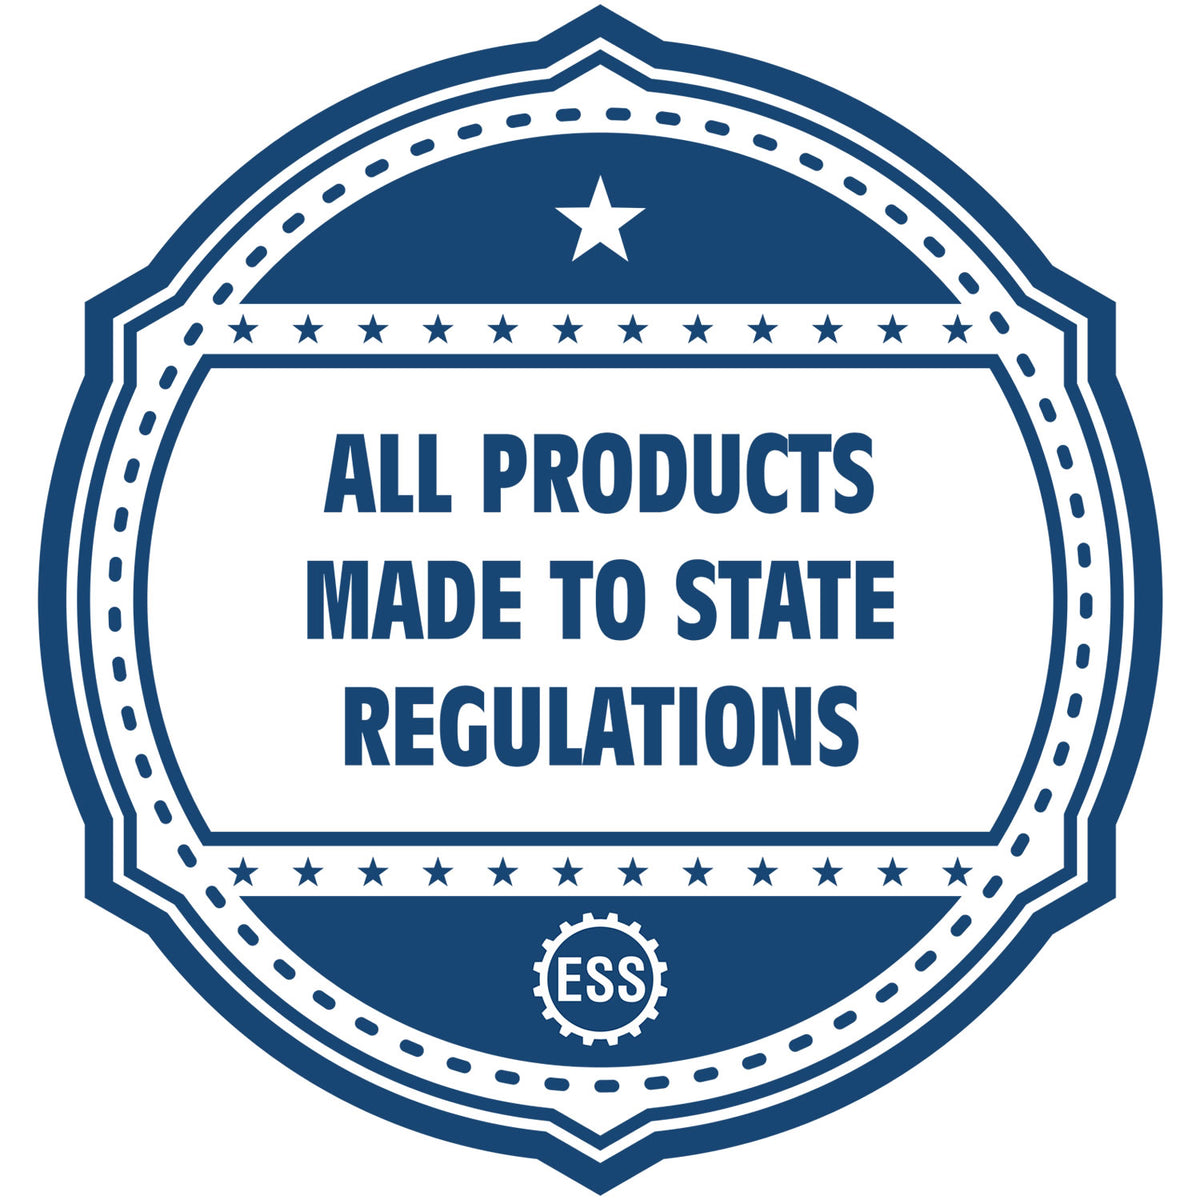 An icon or badge element for the North Carolina Engineer Desk Seal showing that this product is made in compliance with state regulations.